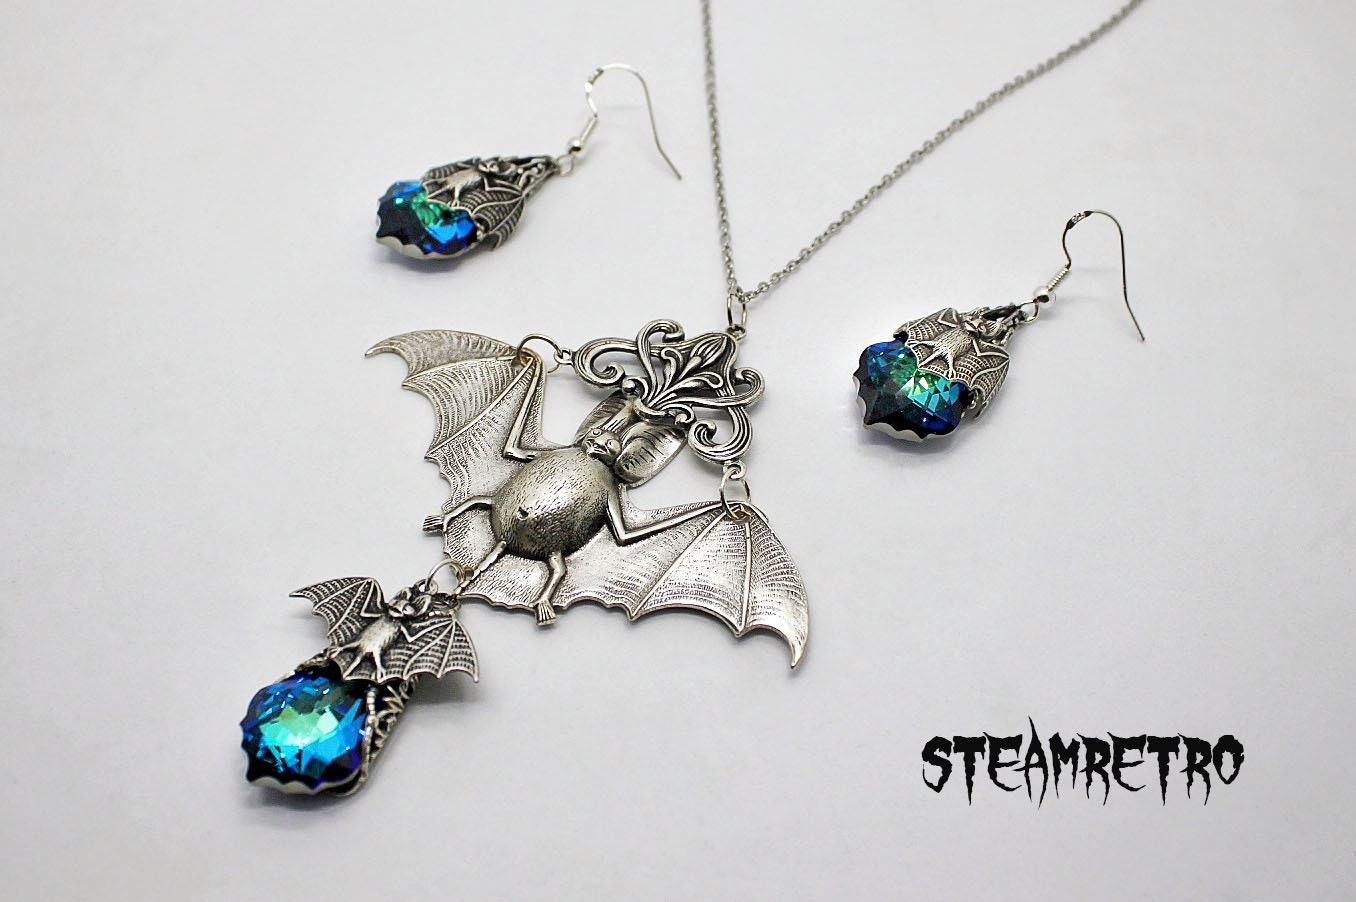 Gothic choker with bat and chains - Steamretro